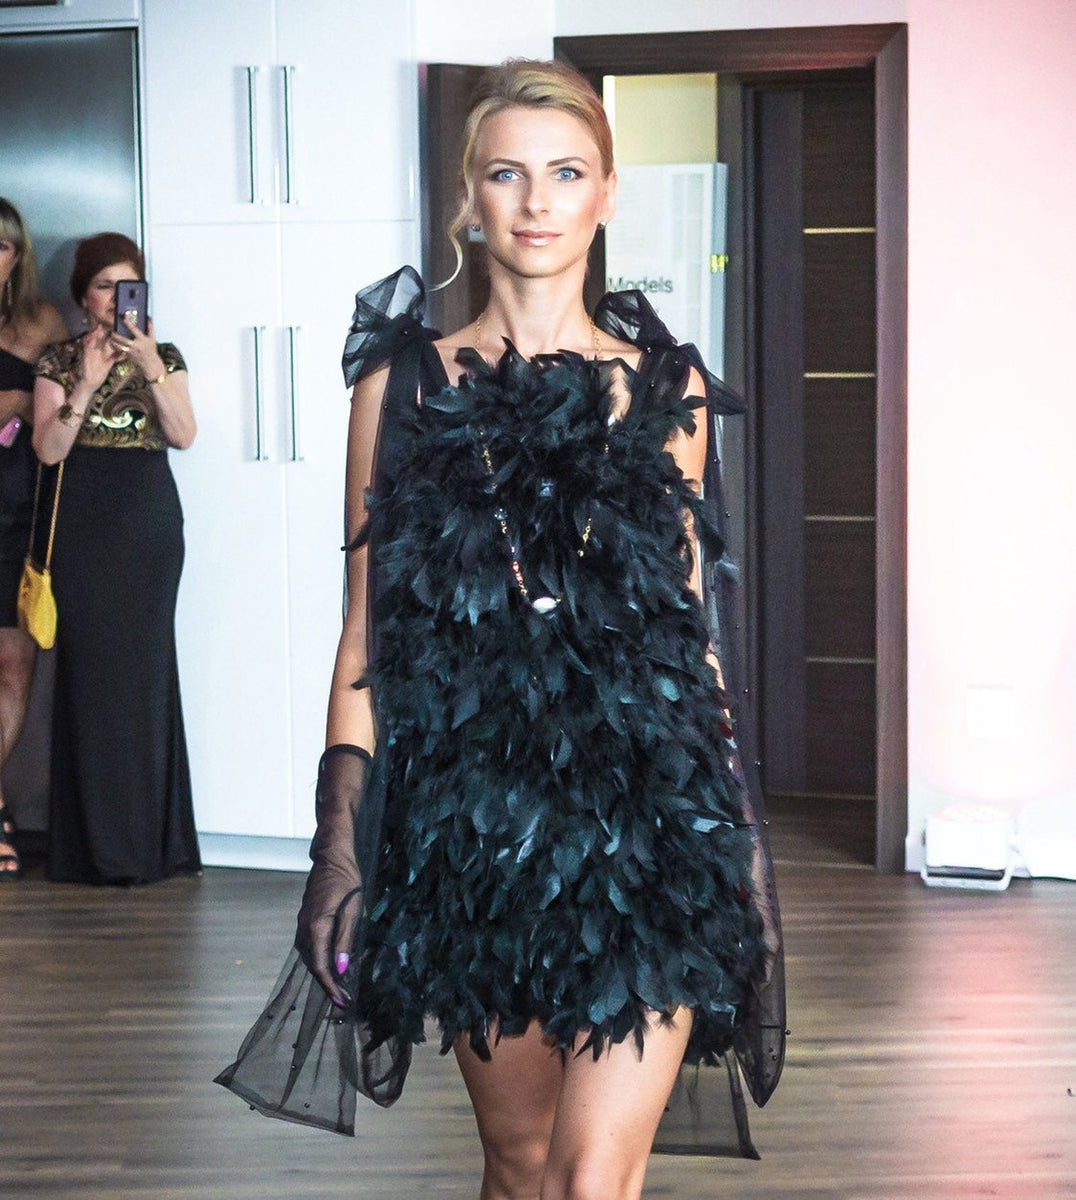 Black Dress with Feathers and Velour – sonyakirshin